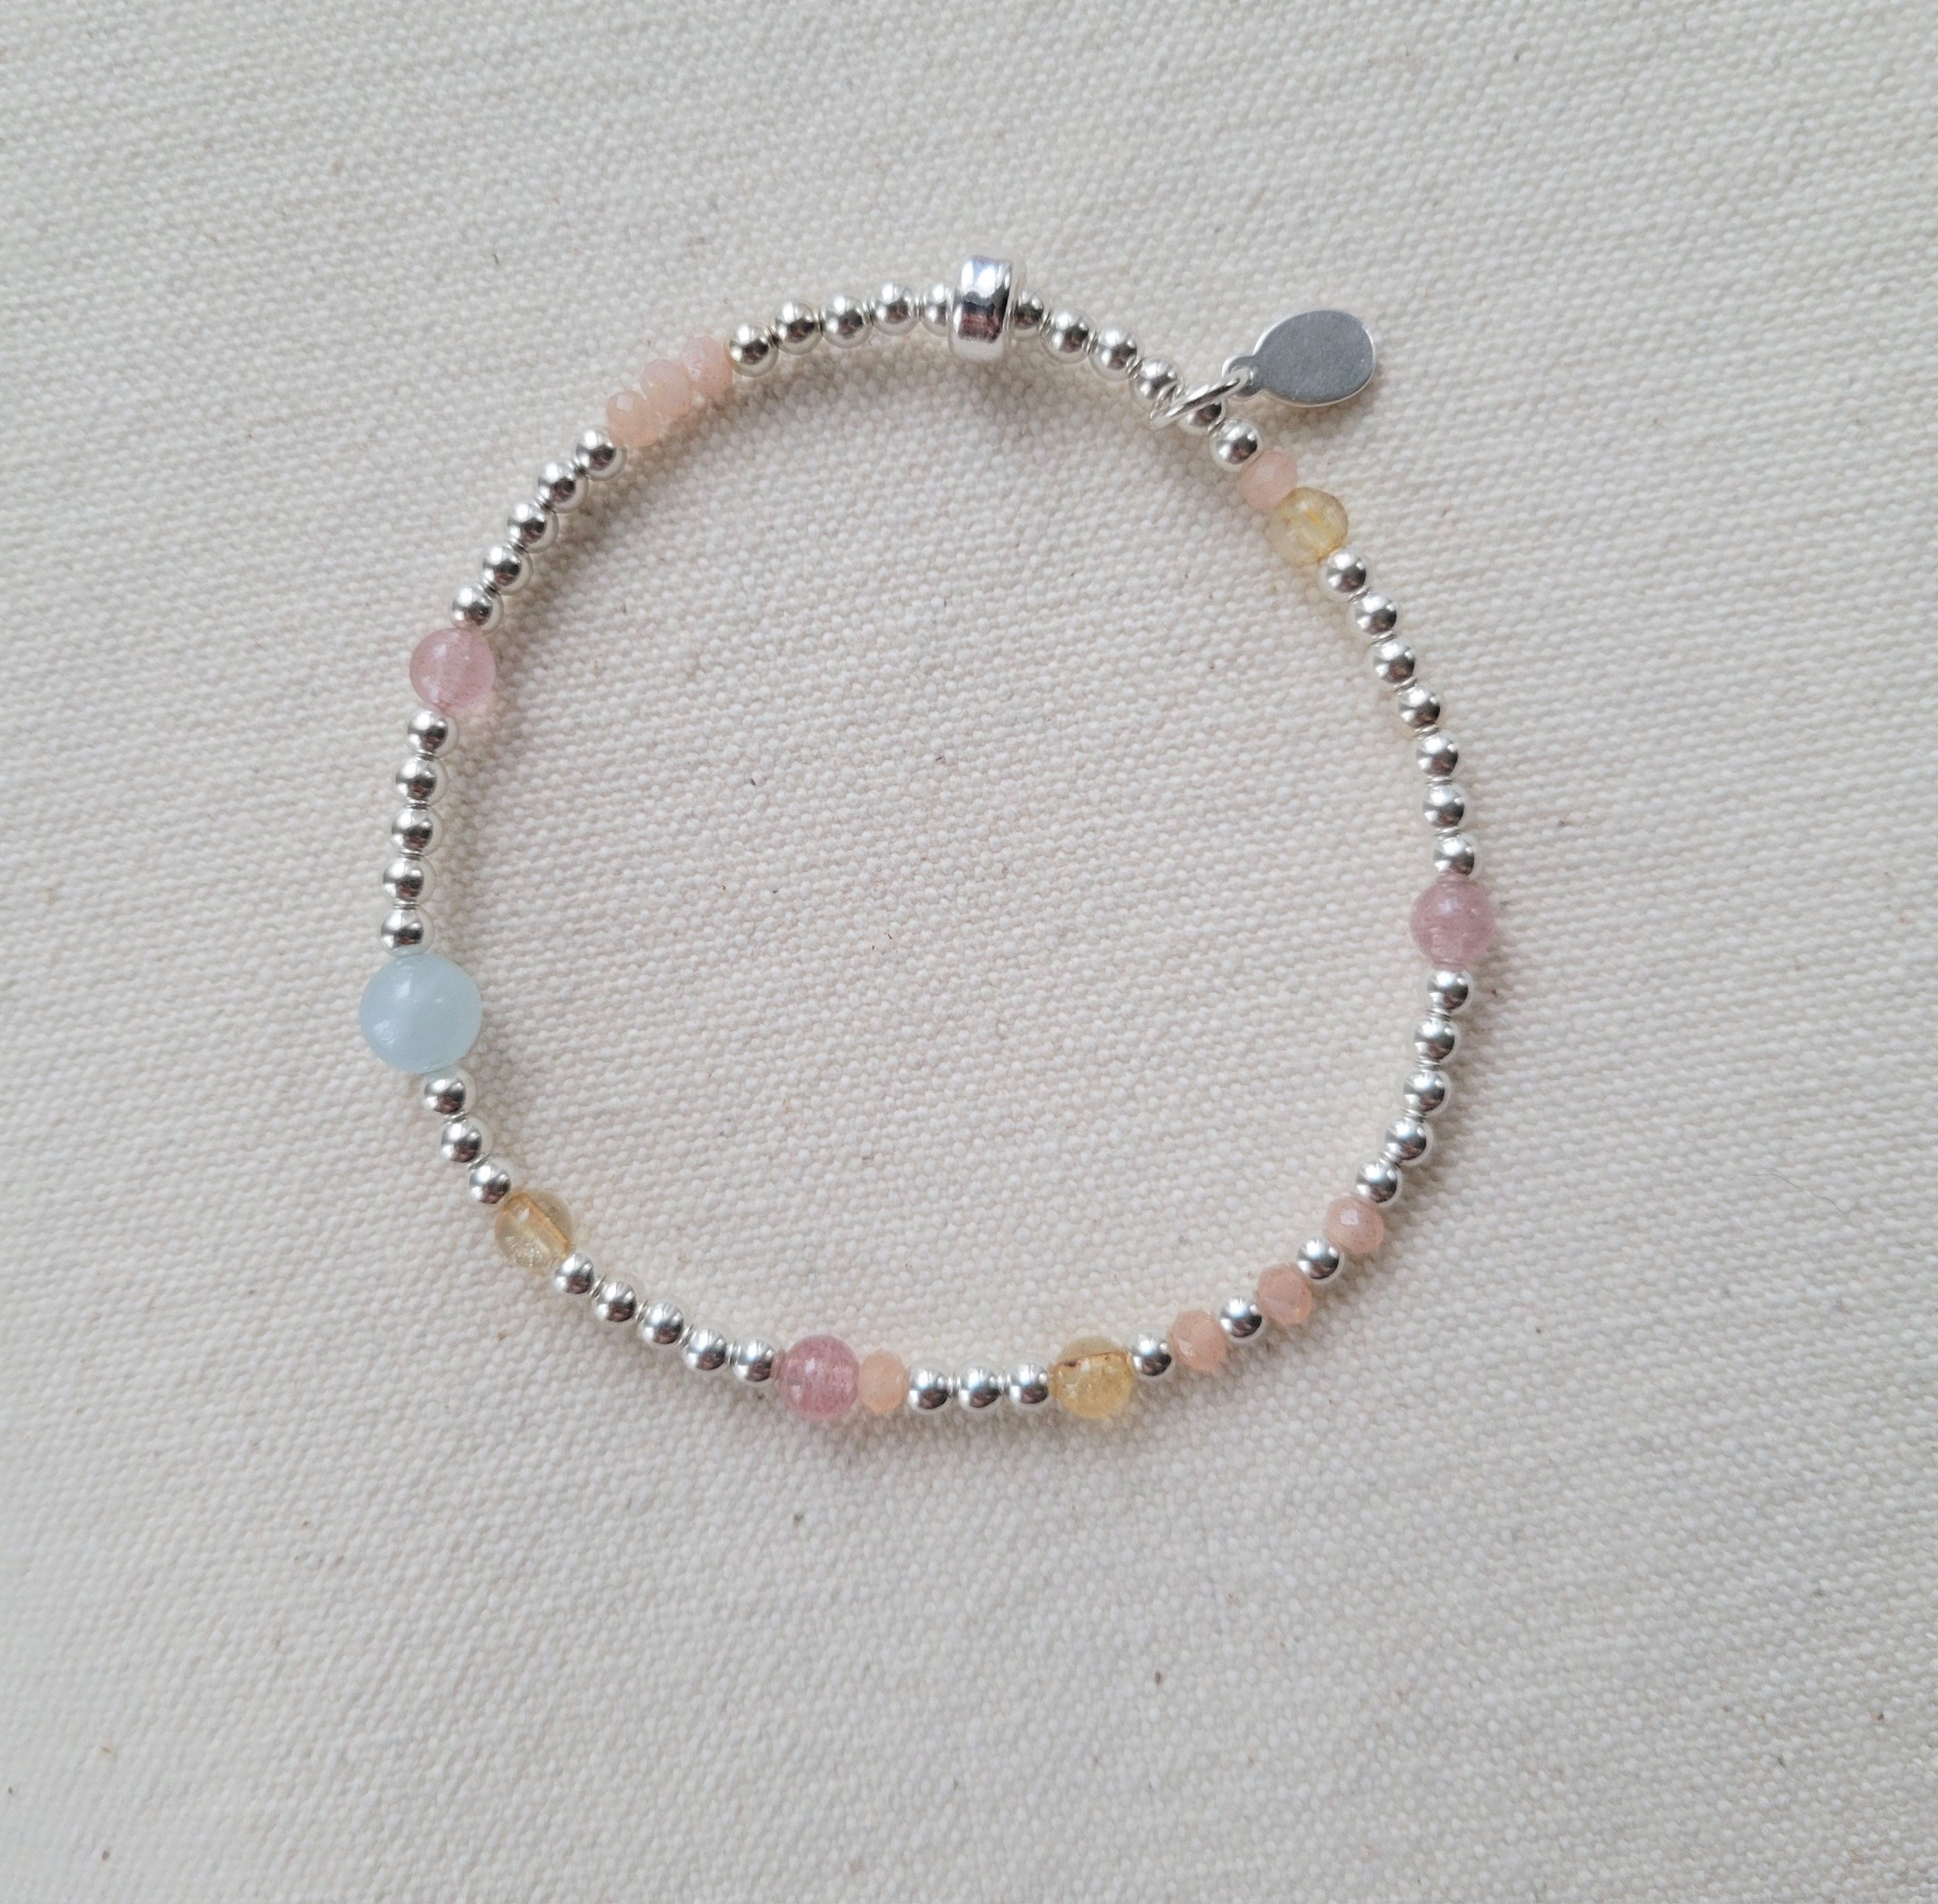 The Candy - Scattered Gemstone and Silver Bracelet